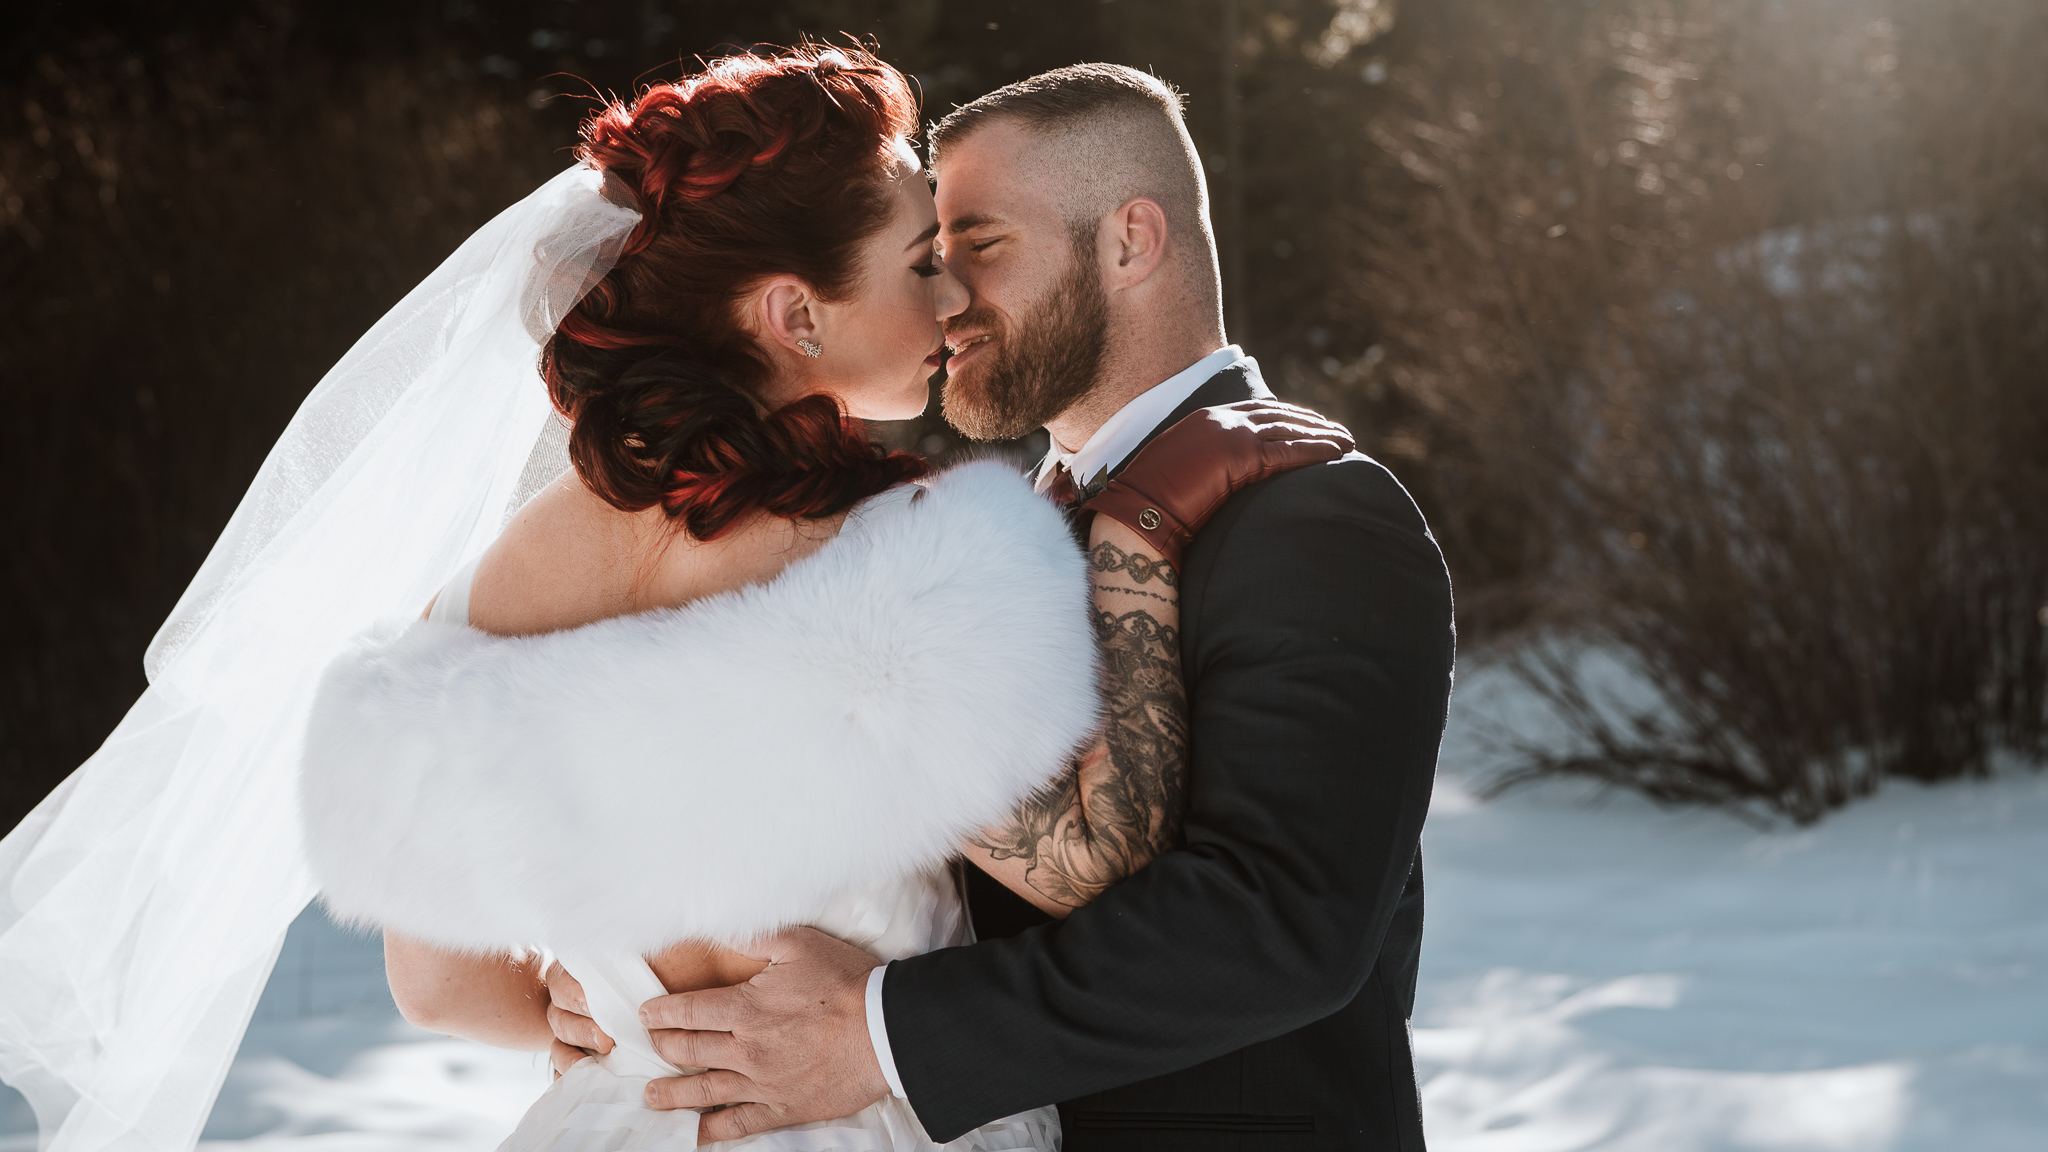 A magical winter wedding at Main Street Station in Breckenridge - filled to the brim with vibrant, rich colors & tons of tears.